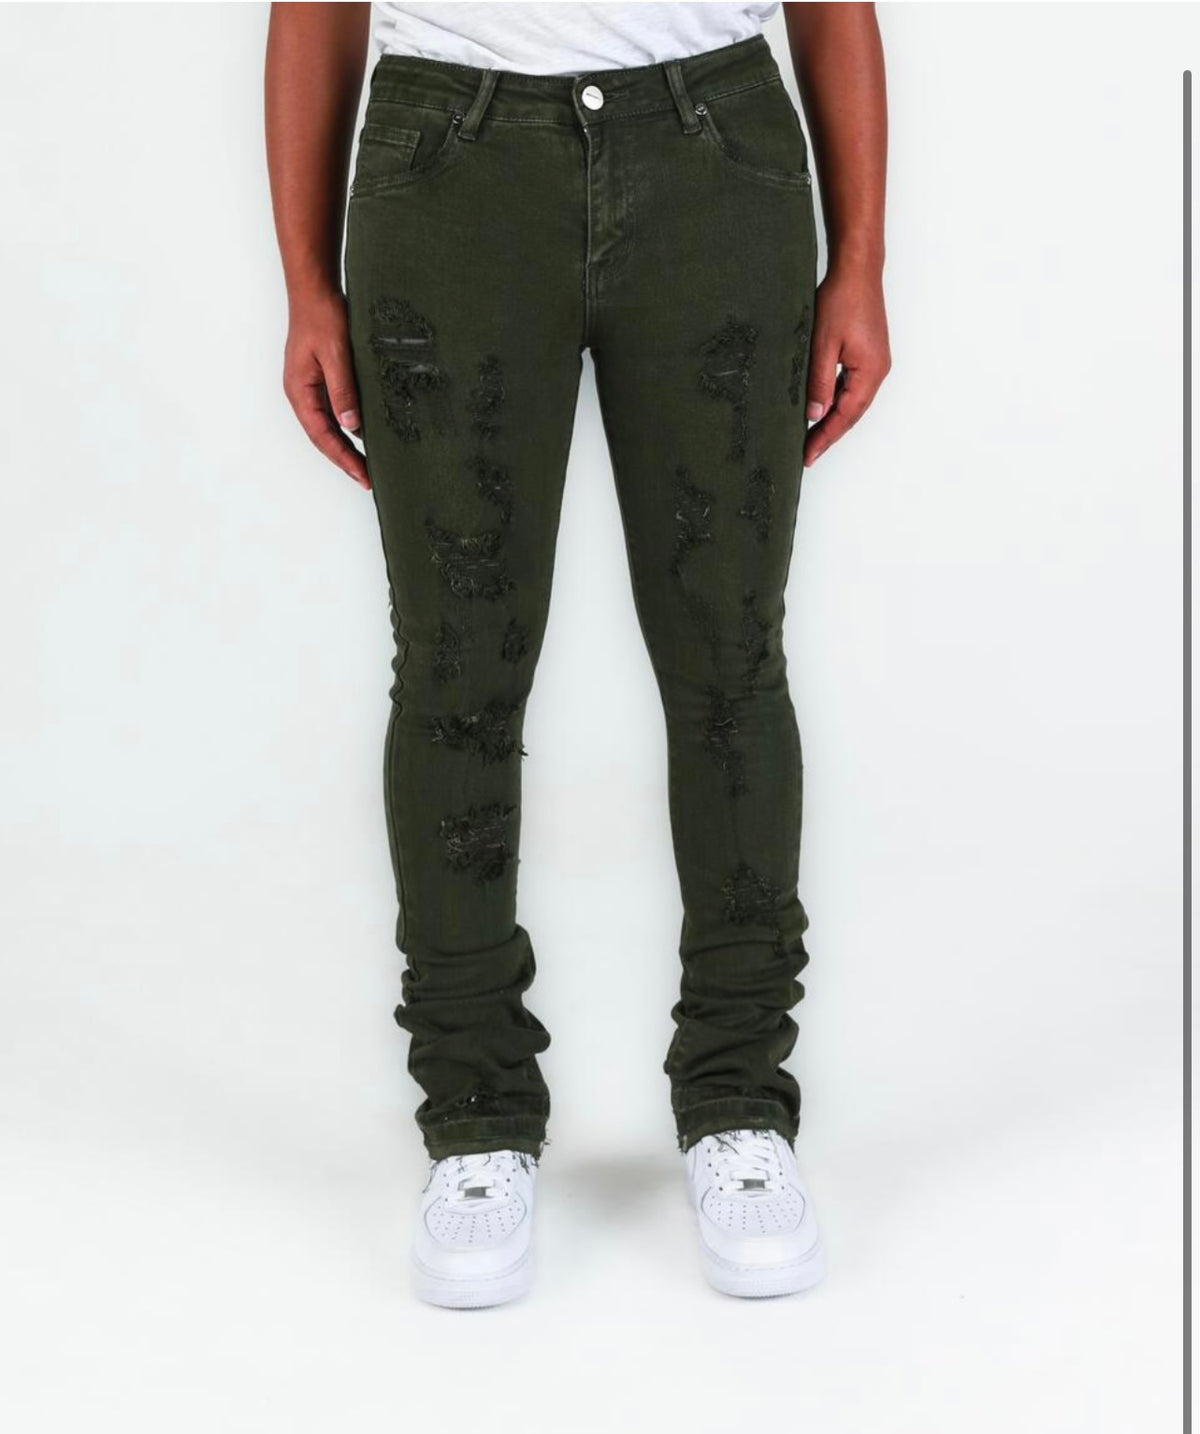 PHEELINGS - "NOW OR NEVER" FLARE STACK DENIM - ARMY